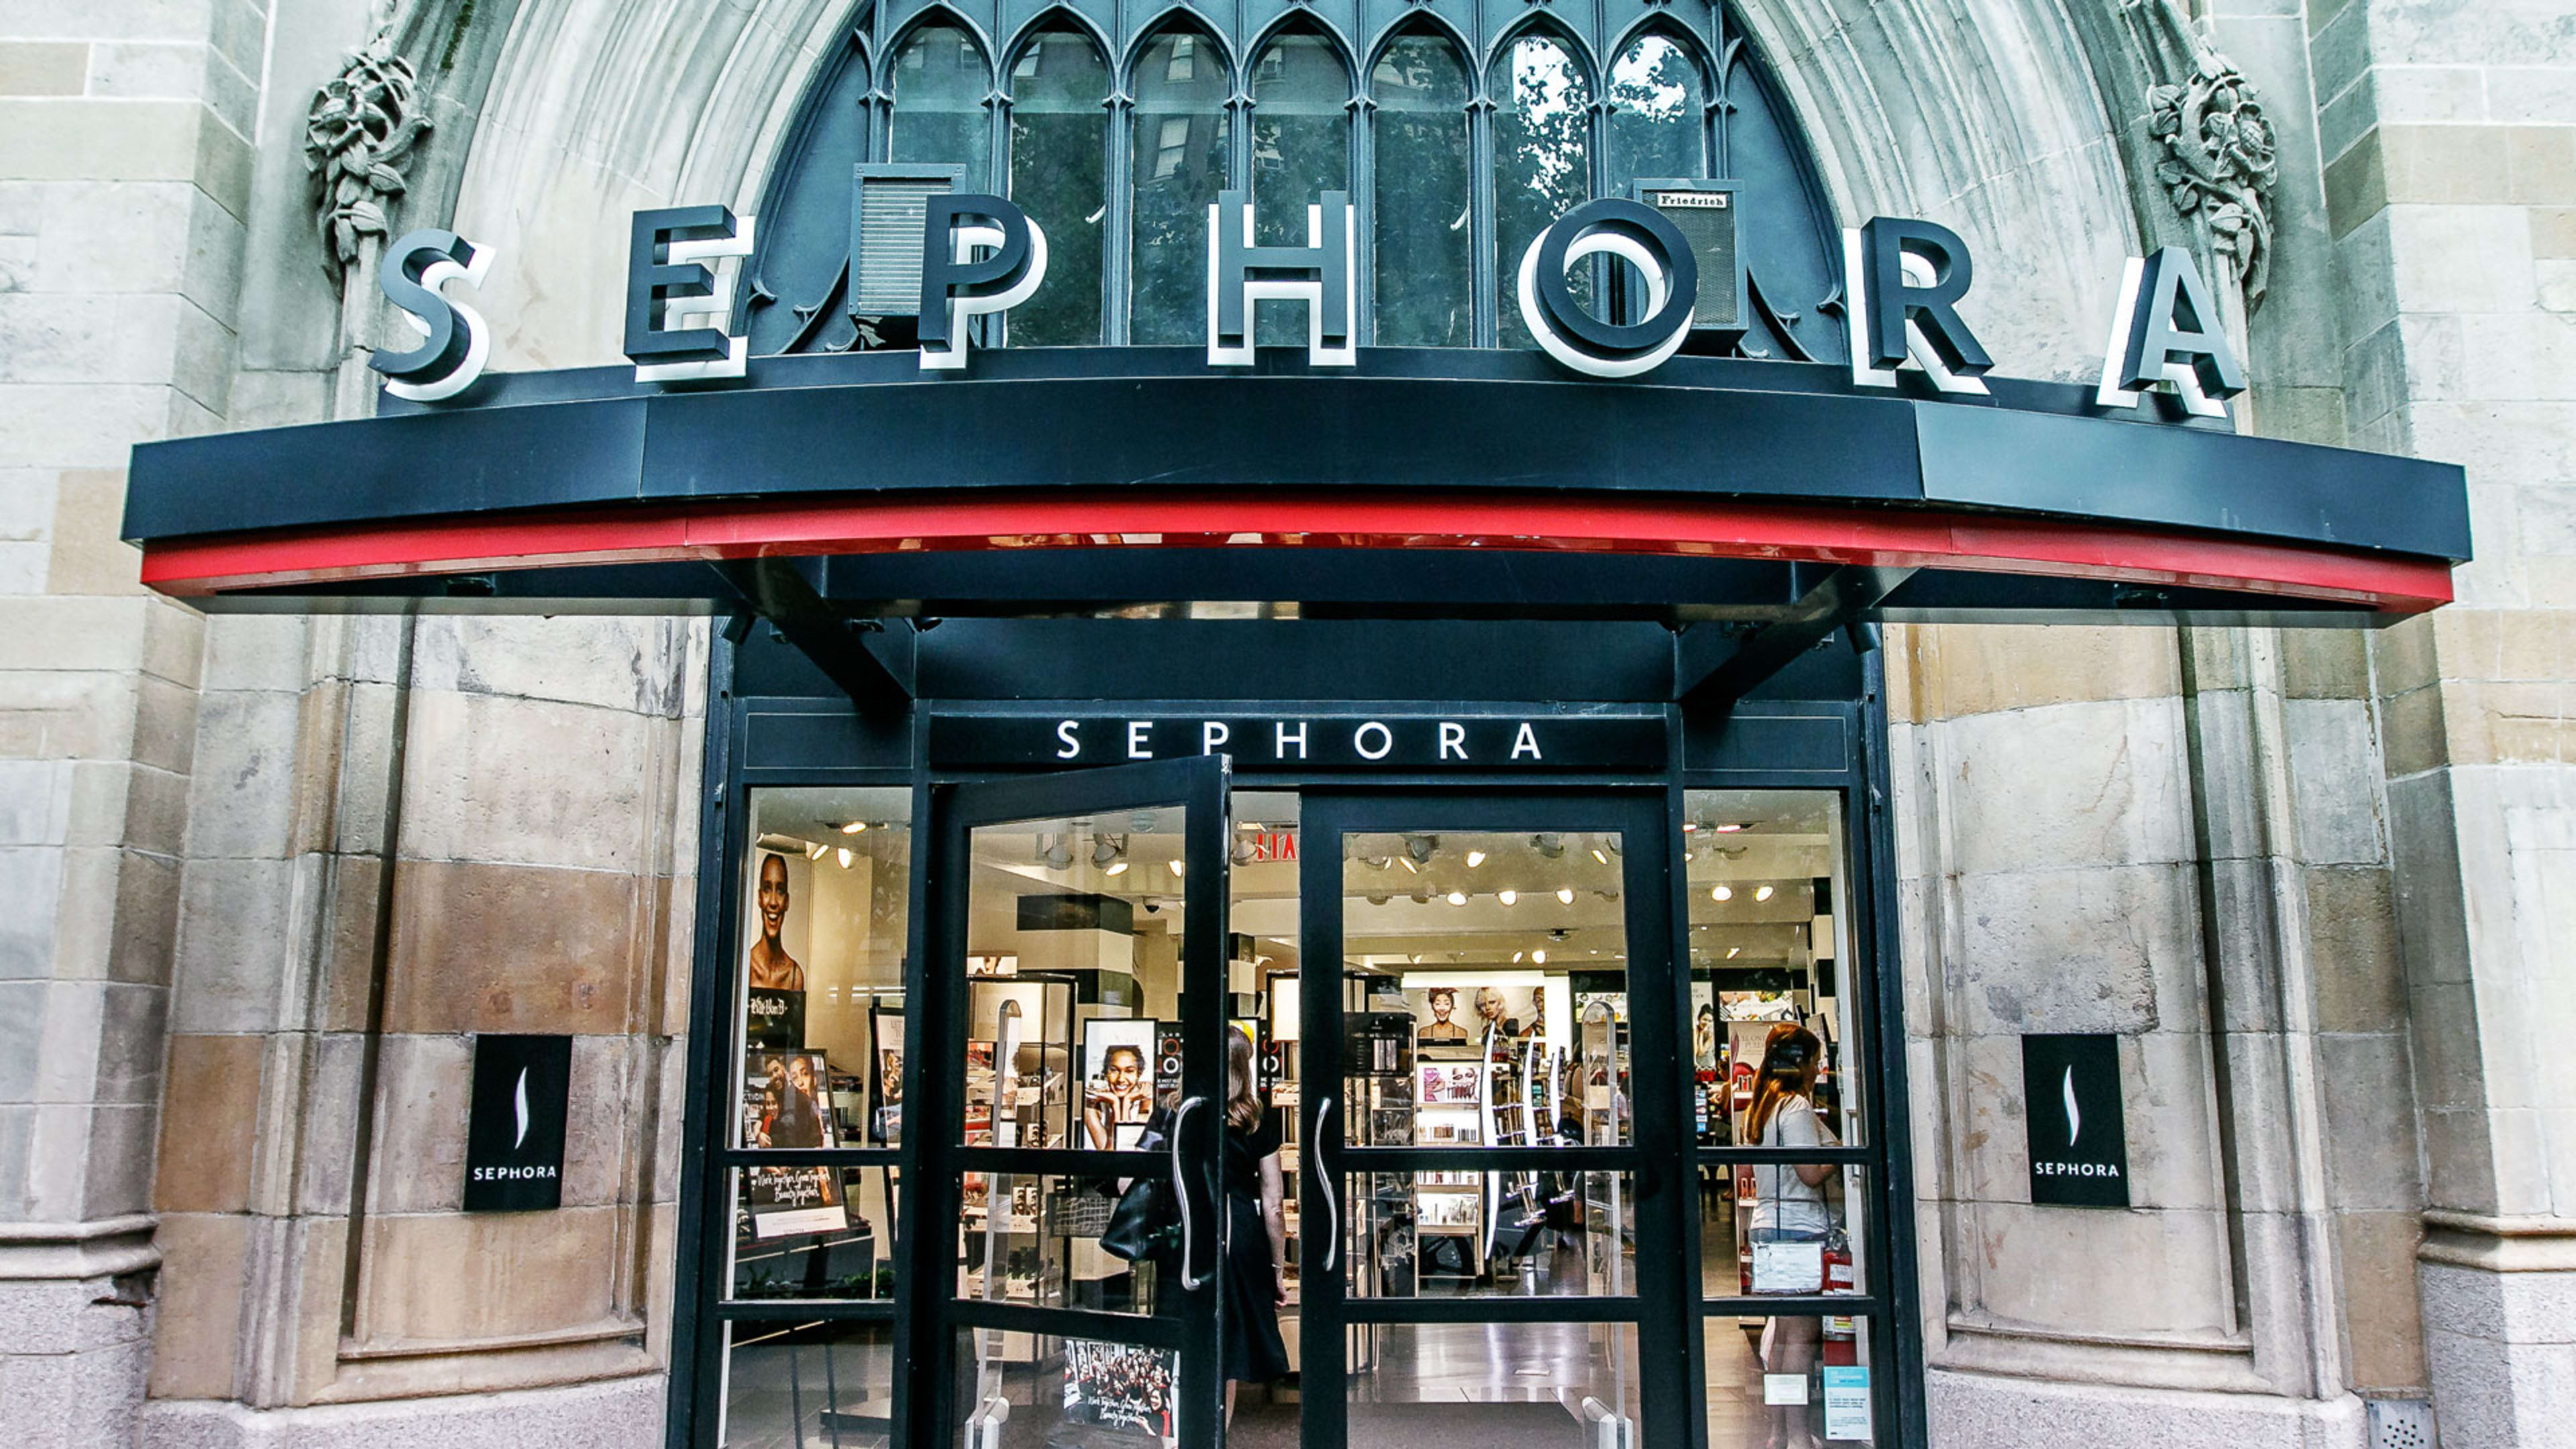 I’ve trained 5,000 retail employees. Here’s why Sephora’s one-hour diversity workshop is far from enough